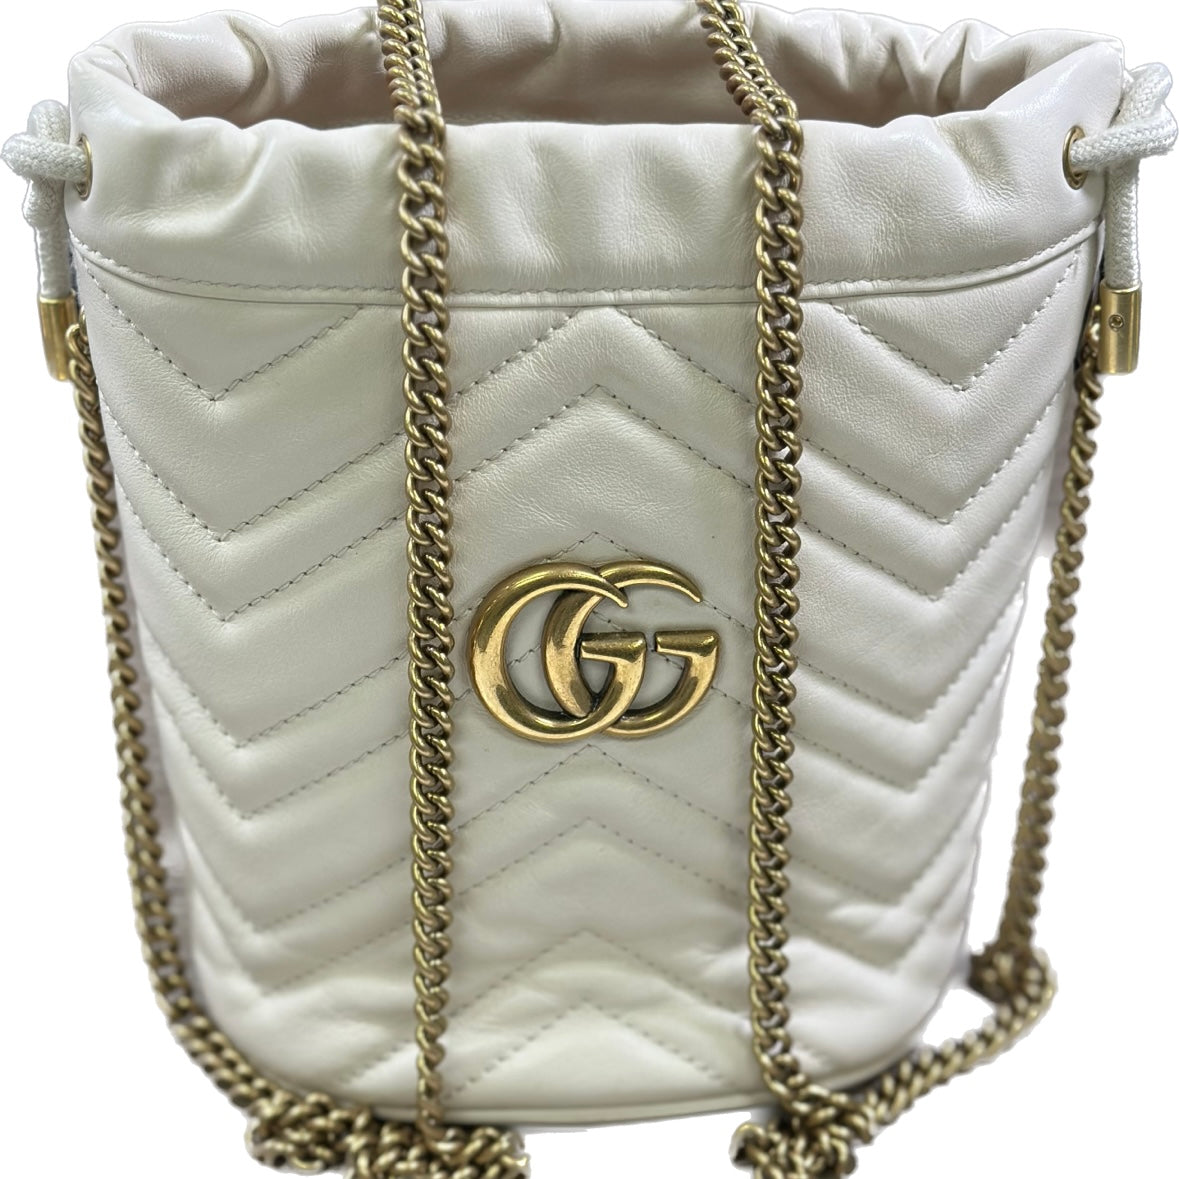 Gucci Bags for Women